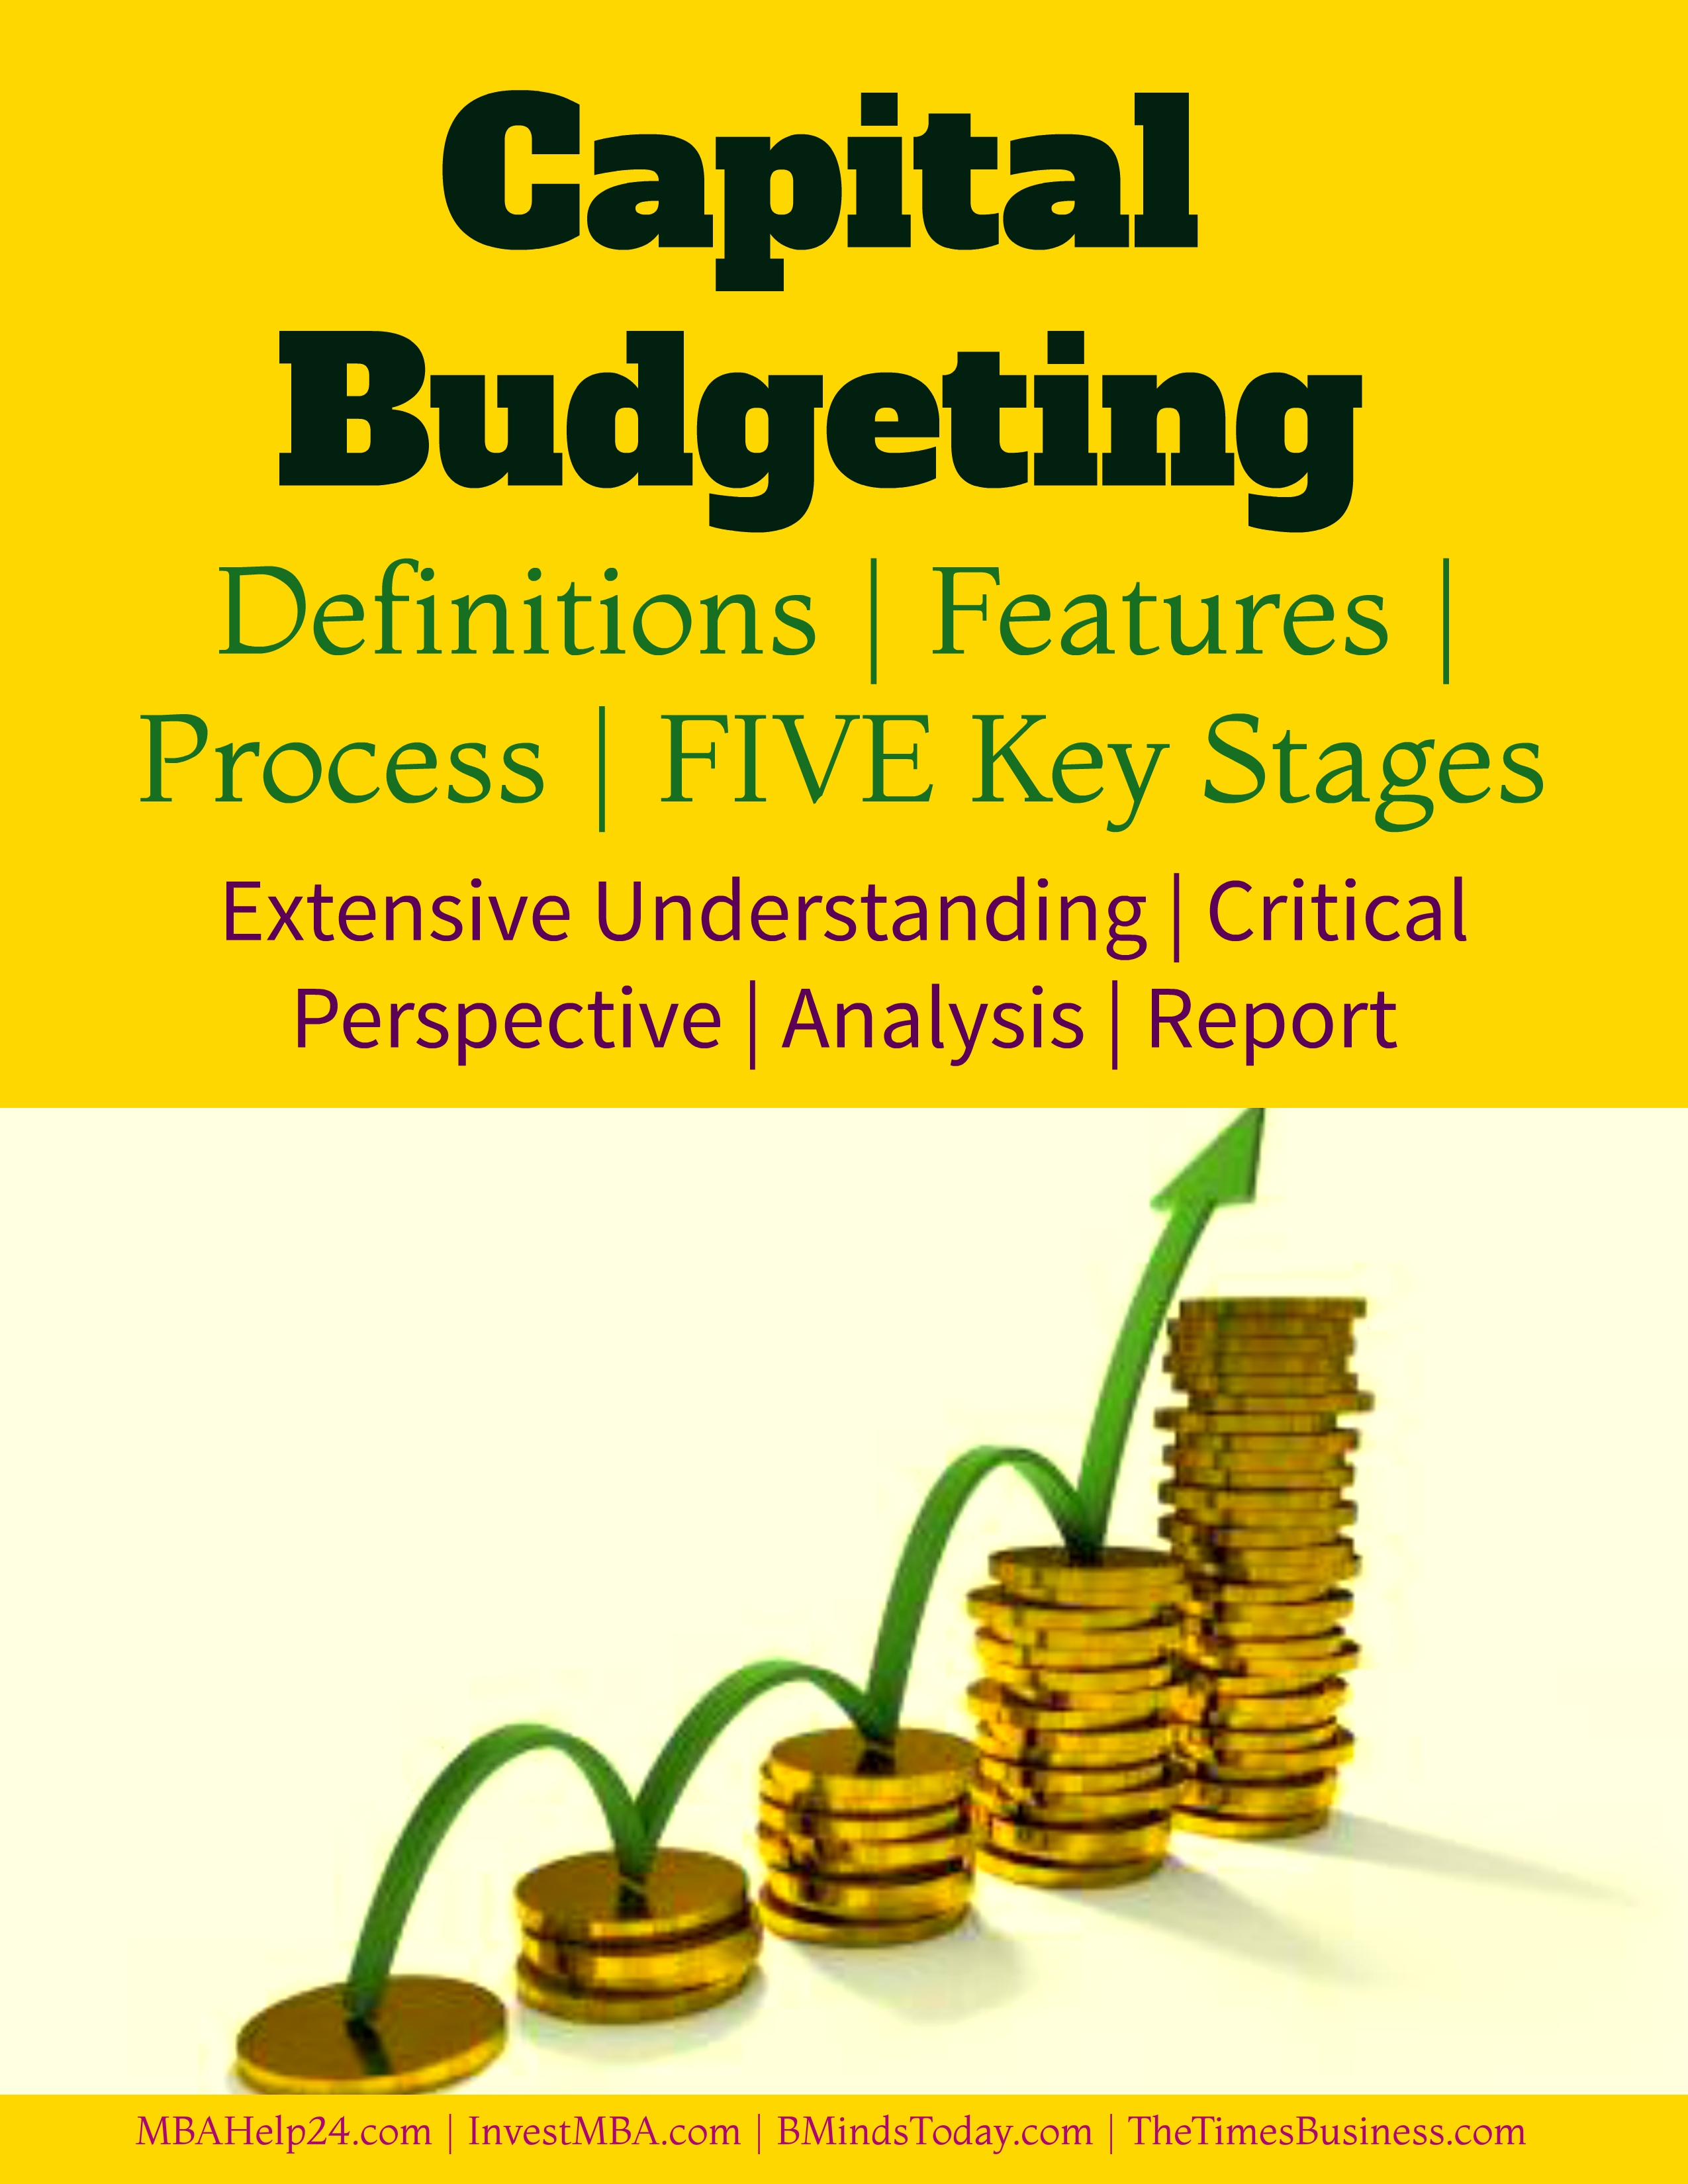 Capital budgeting- definitions, processes, stages and implications capital budgeting Capital Budgeting | Definitions | Features | Process | FIVE Stages Capital budgeting definitions processes stages and implications Capital Budgeting | Definitions | Features | Process Capital Budgeting | Definitions | Features | Process Capital budgeting definitions processes stages and implications